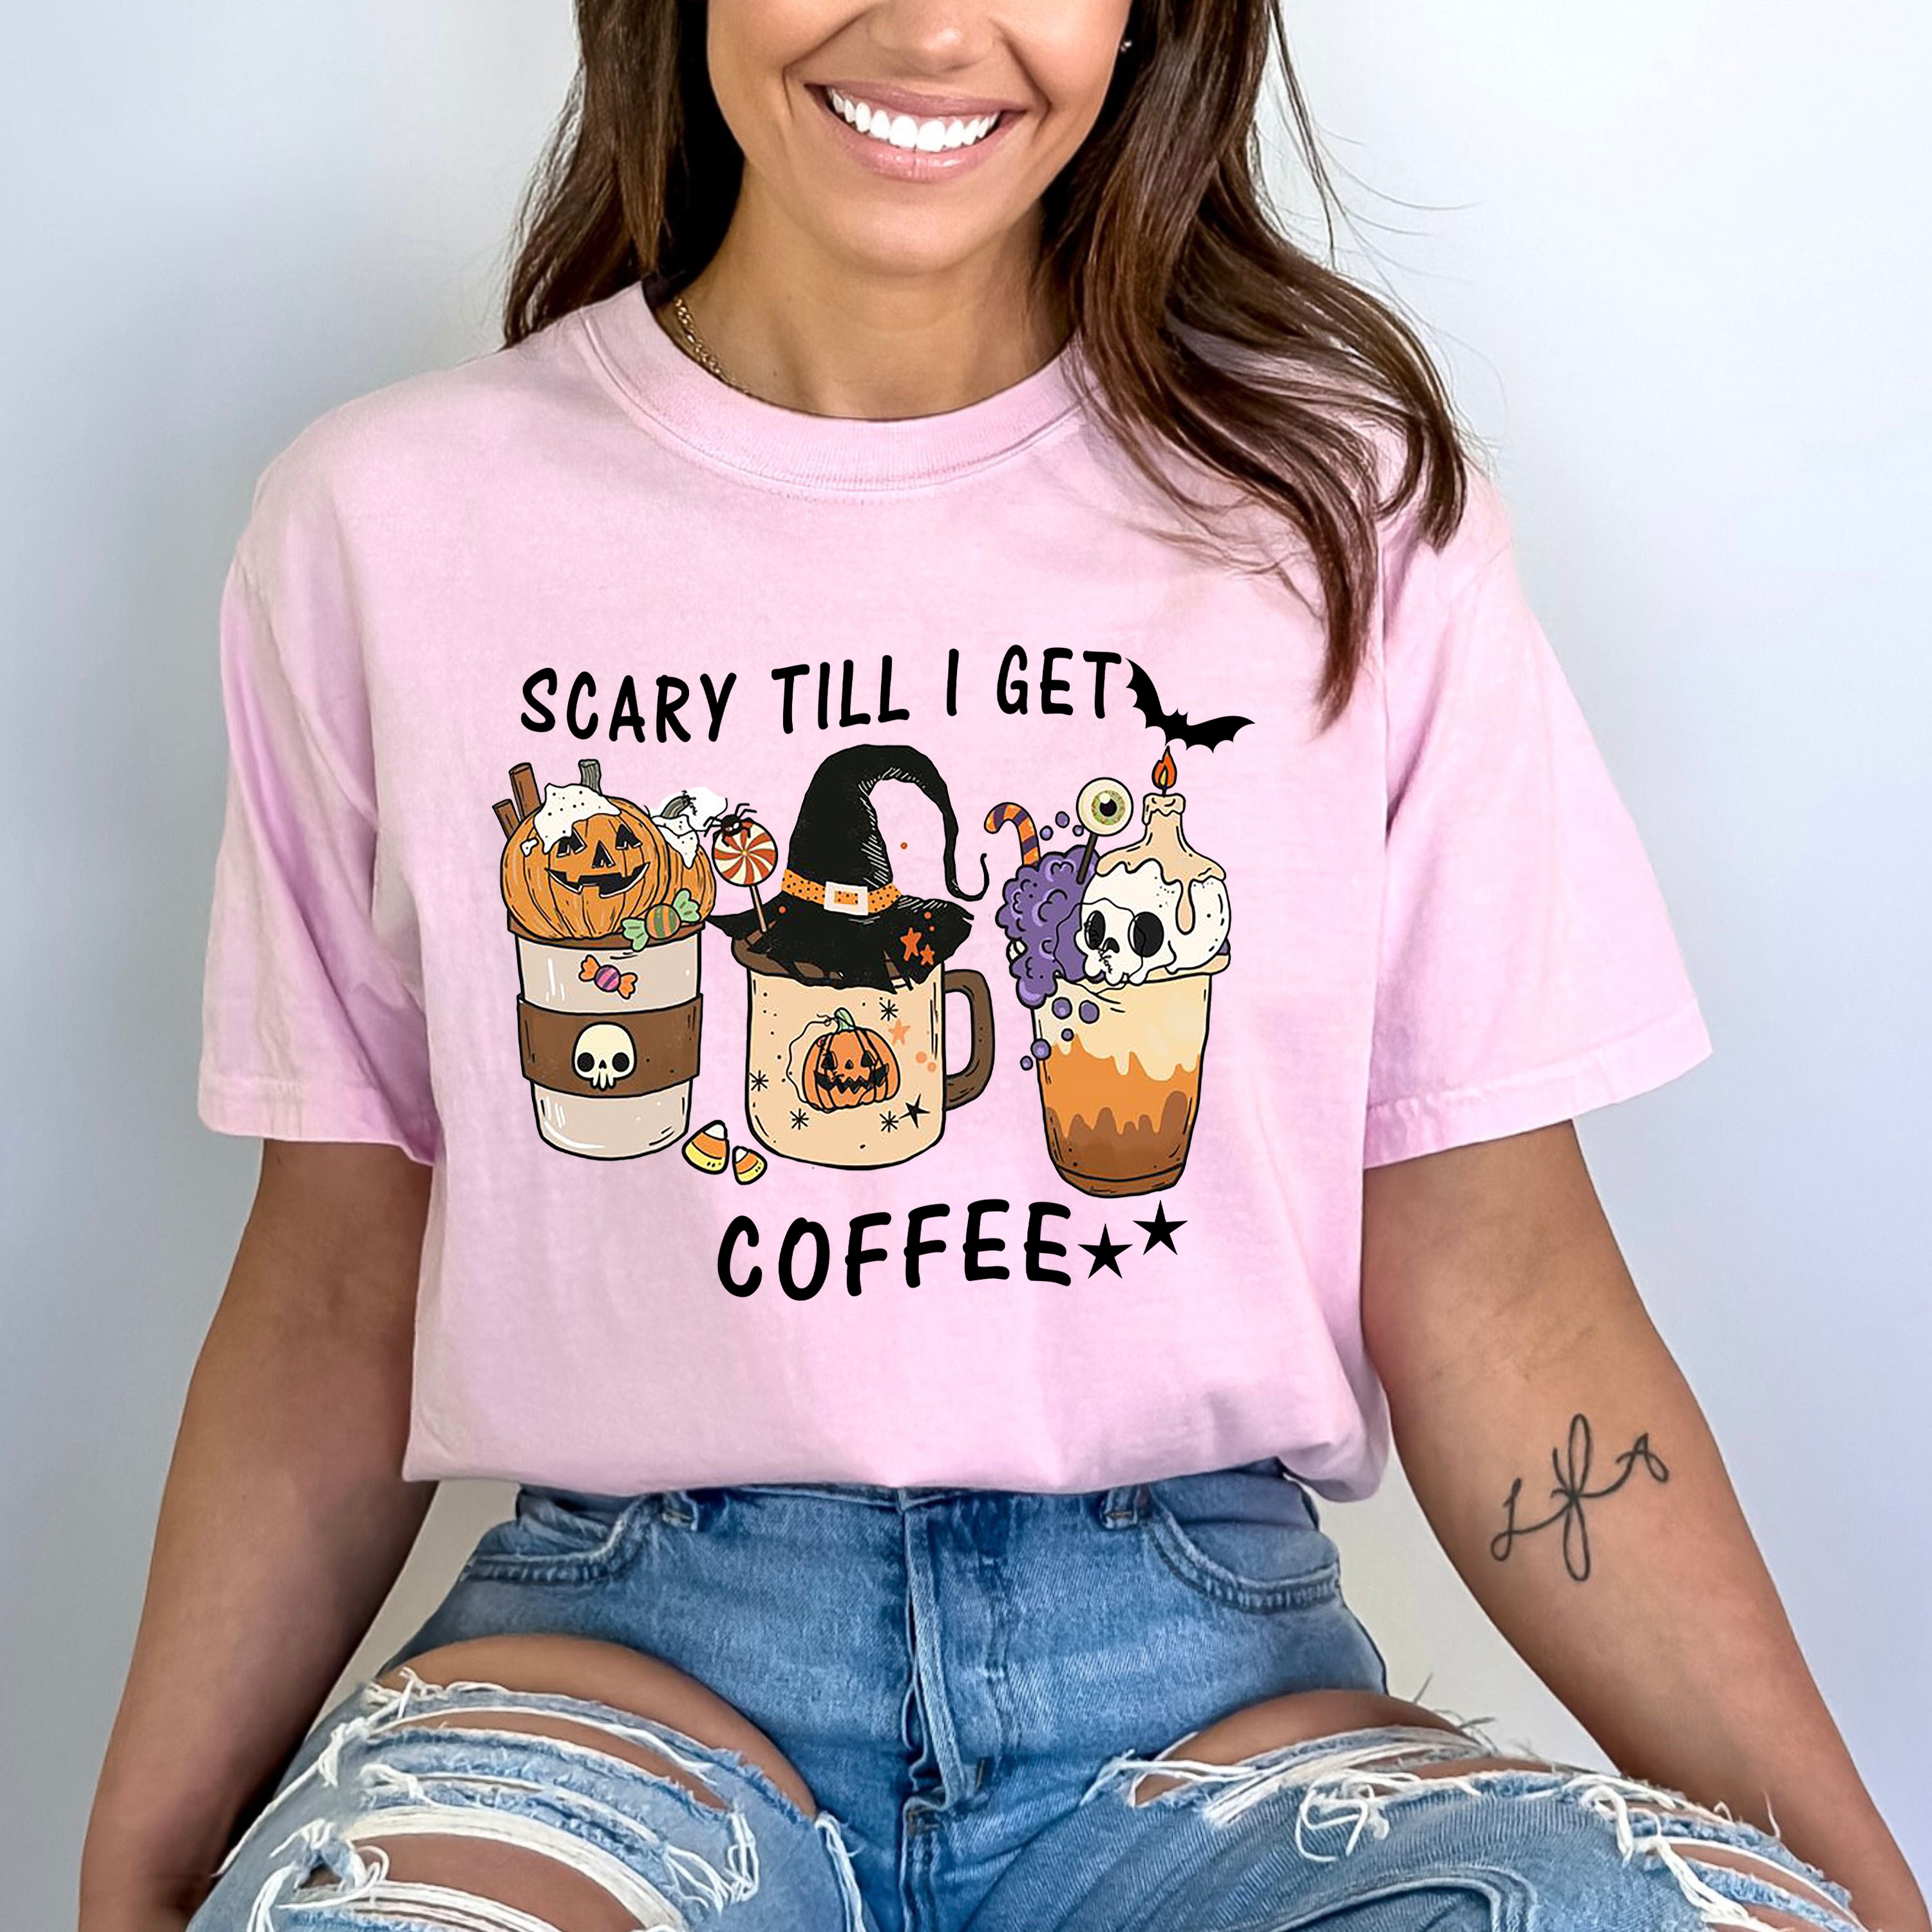 Scary Till I Get Coffee - Bella Canvas